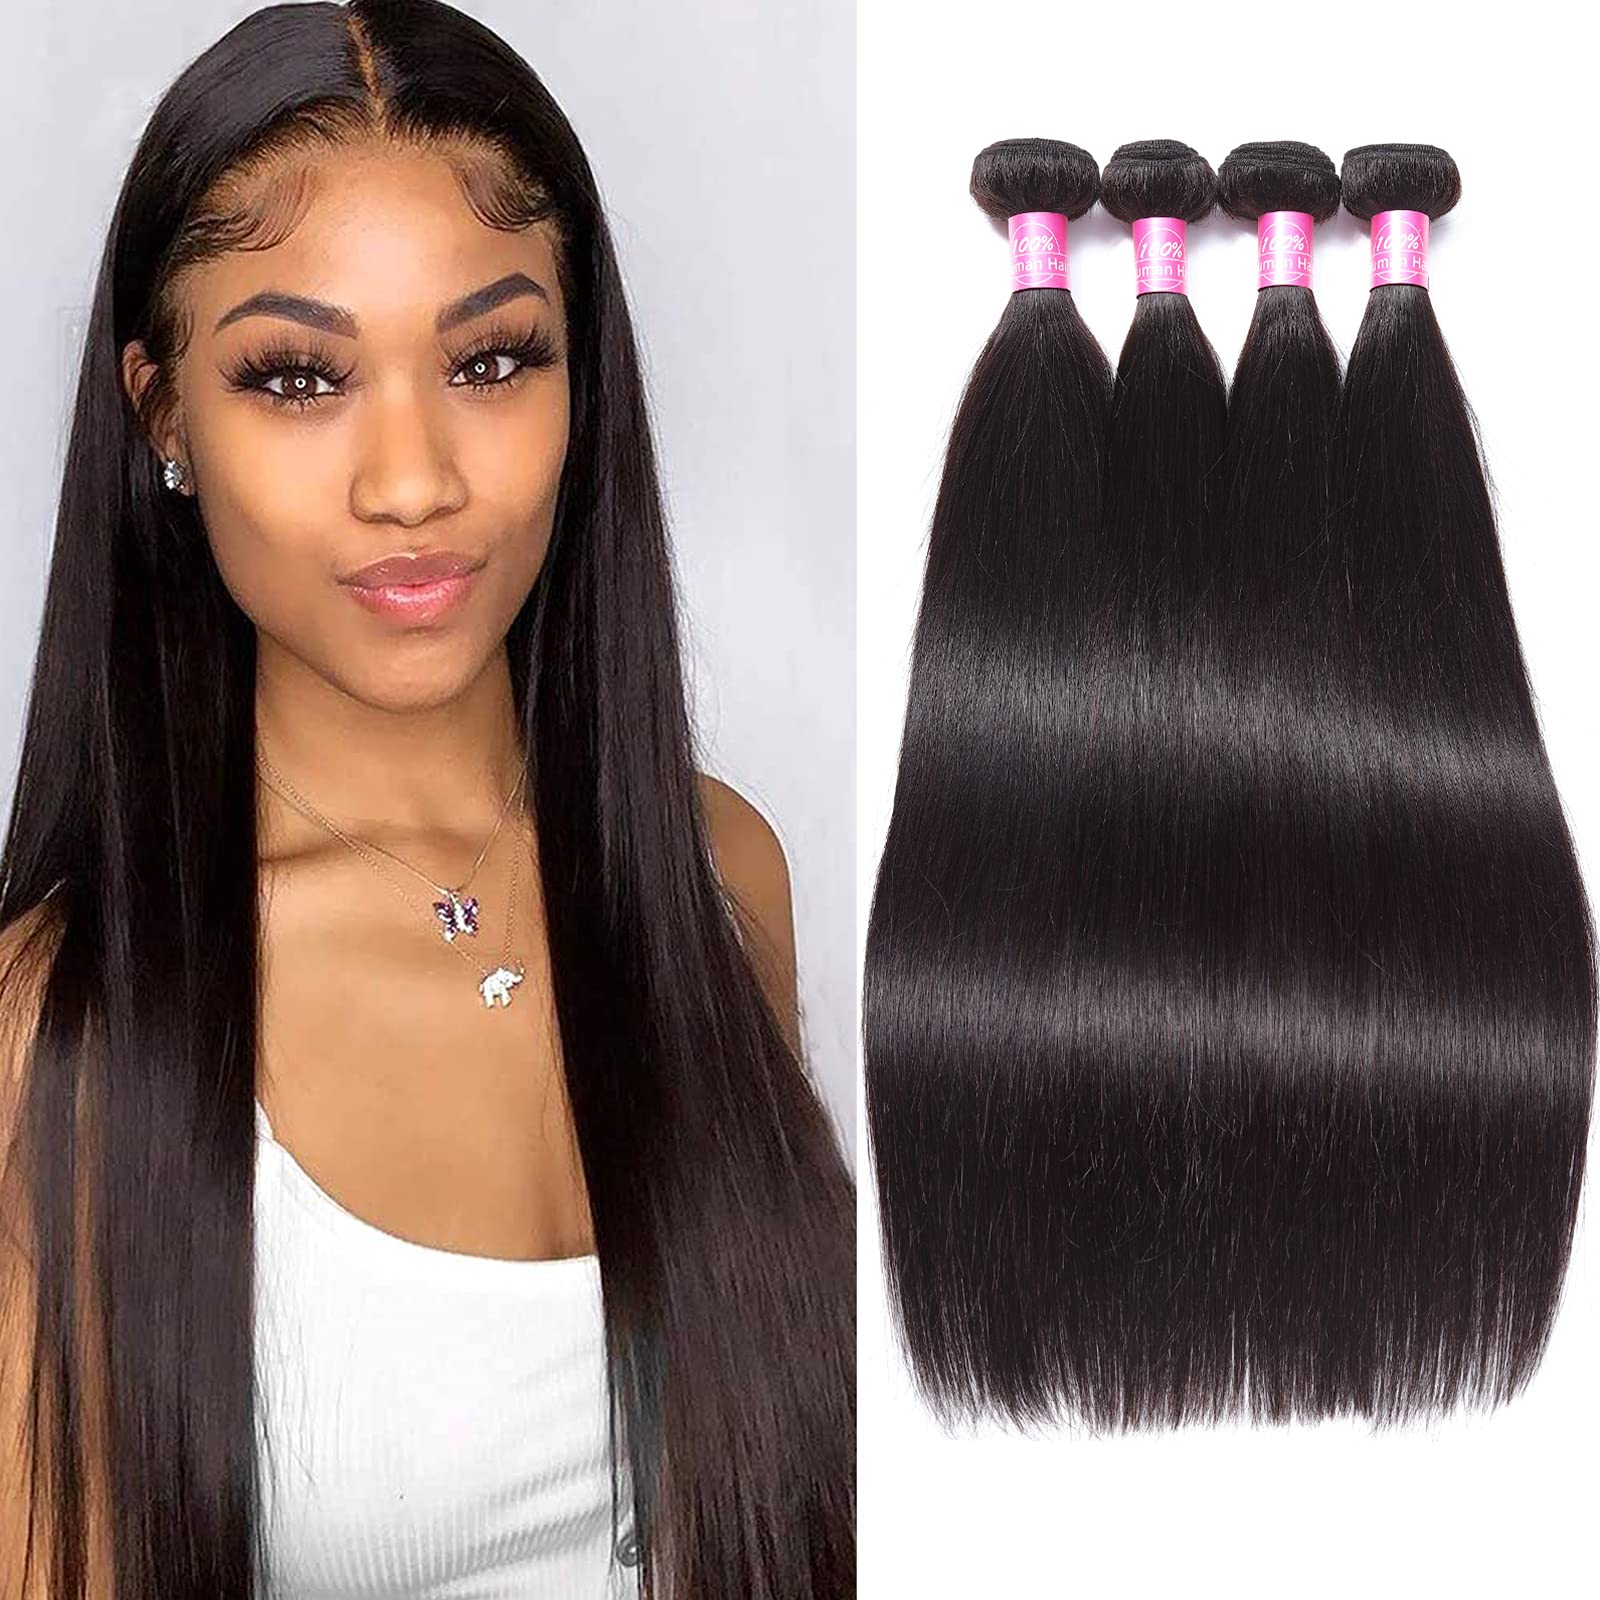 How To Blend Clip In Kinky Straight Hair Extensions With Short Hair – A V E  R A